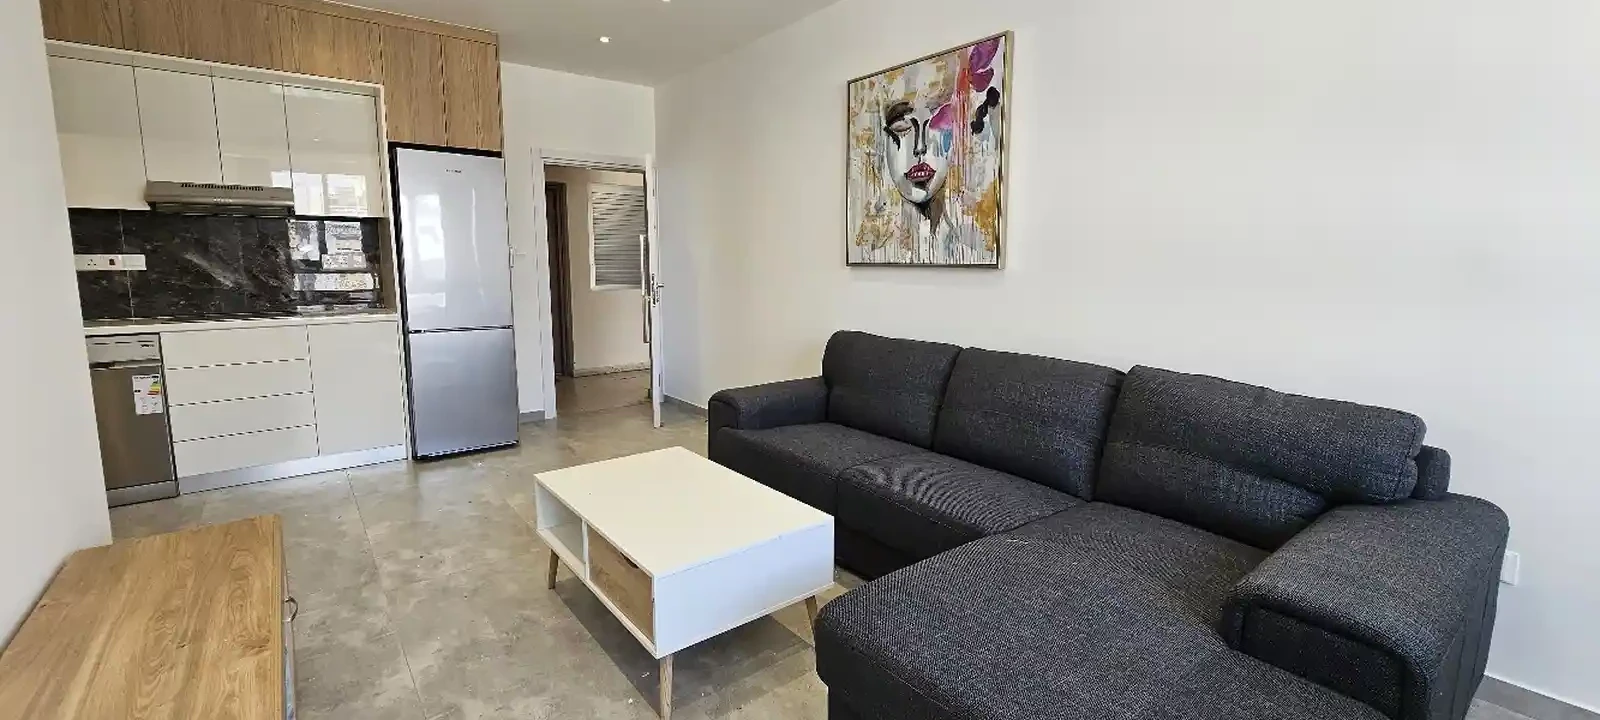 2-bedroom apartment to rent €2.300, image 1